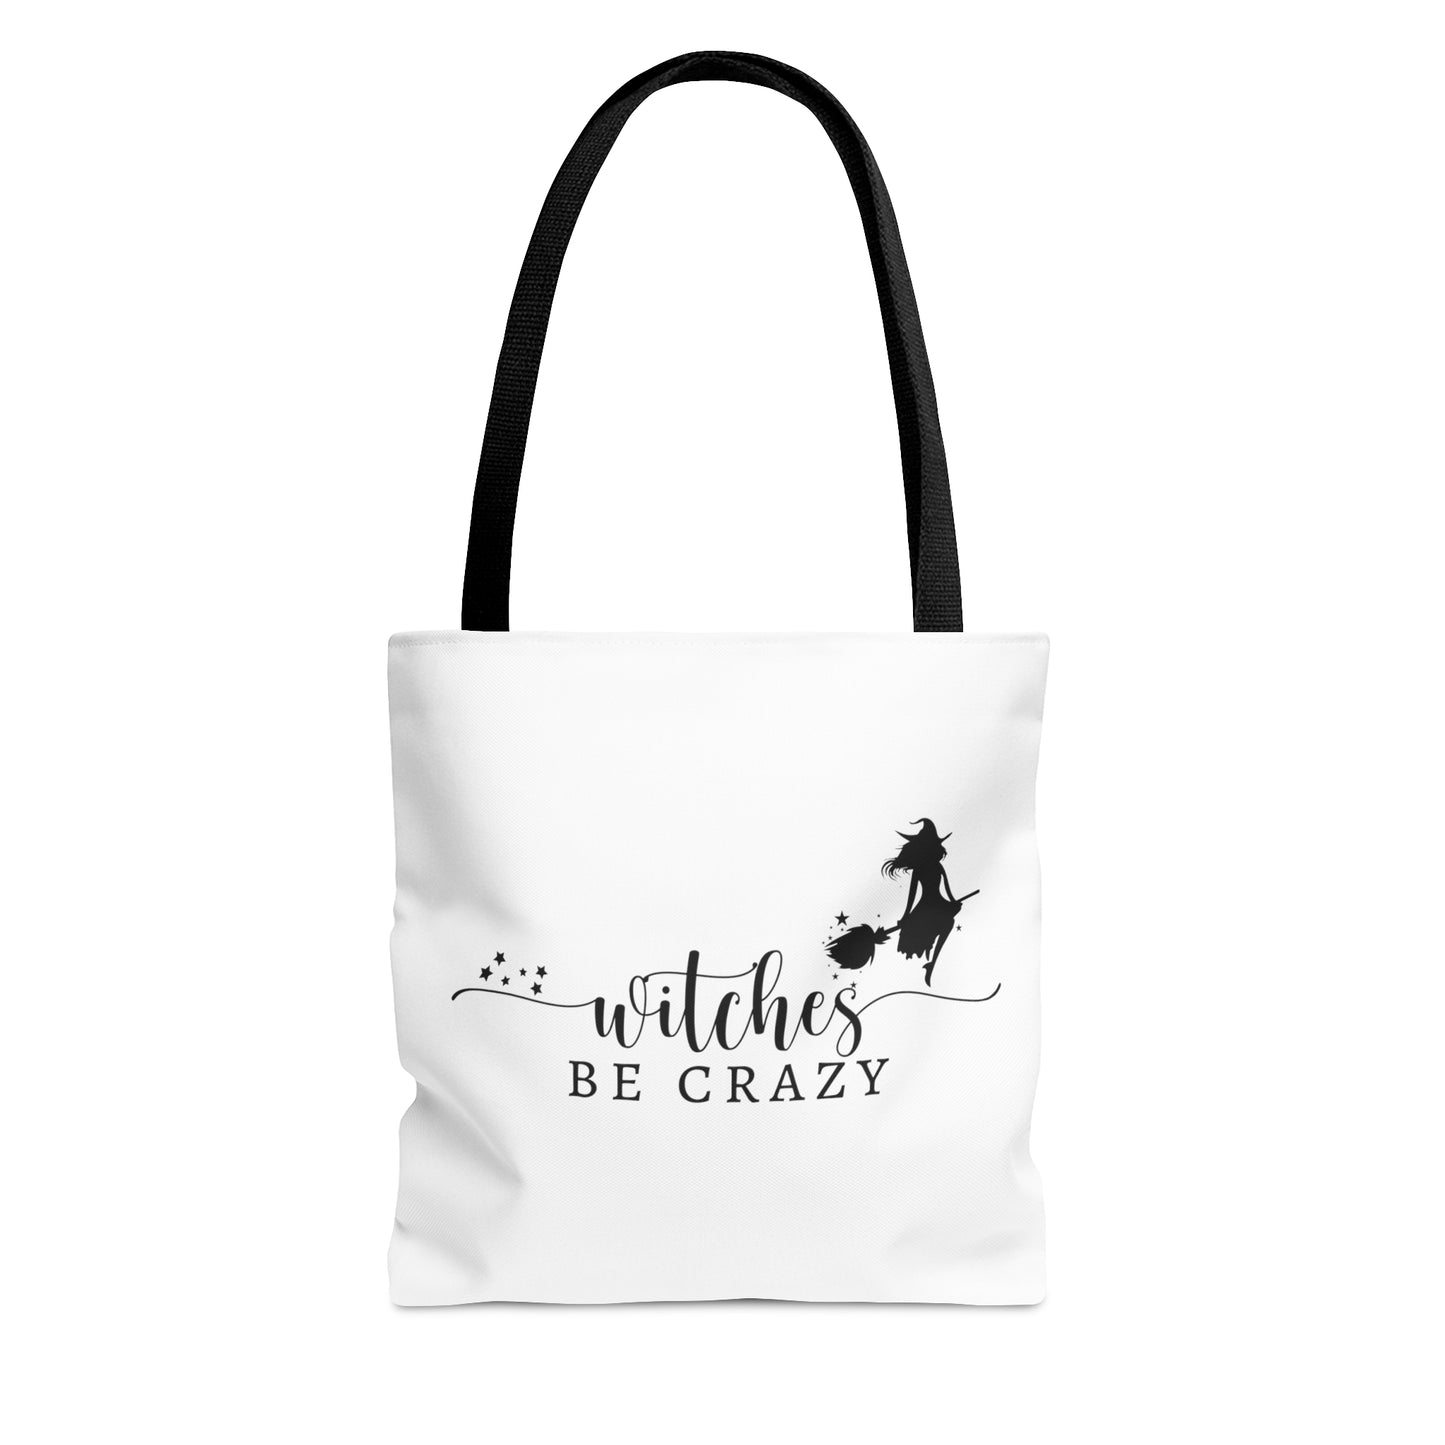 Copy of Tote Bag - Black Cat Moon Phases